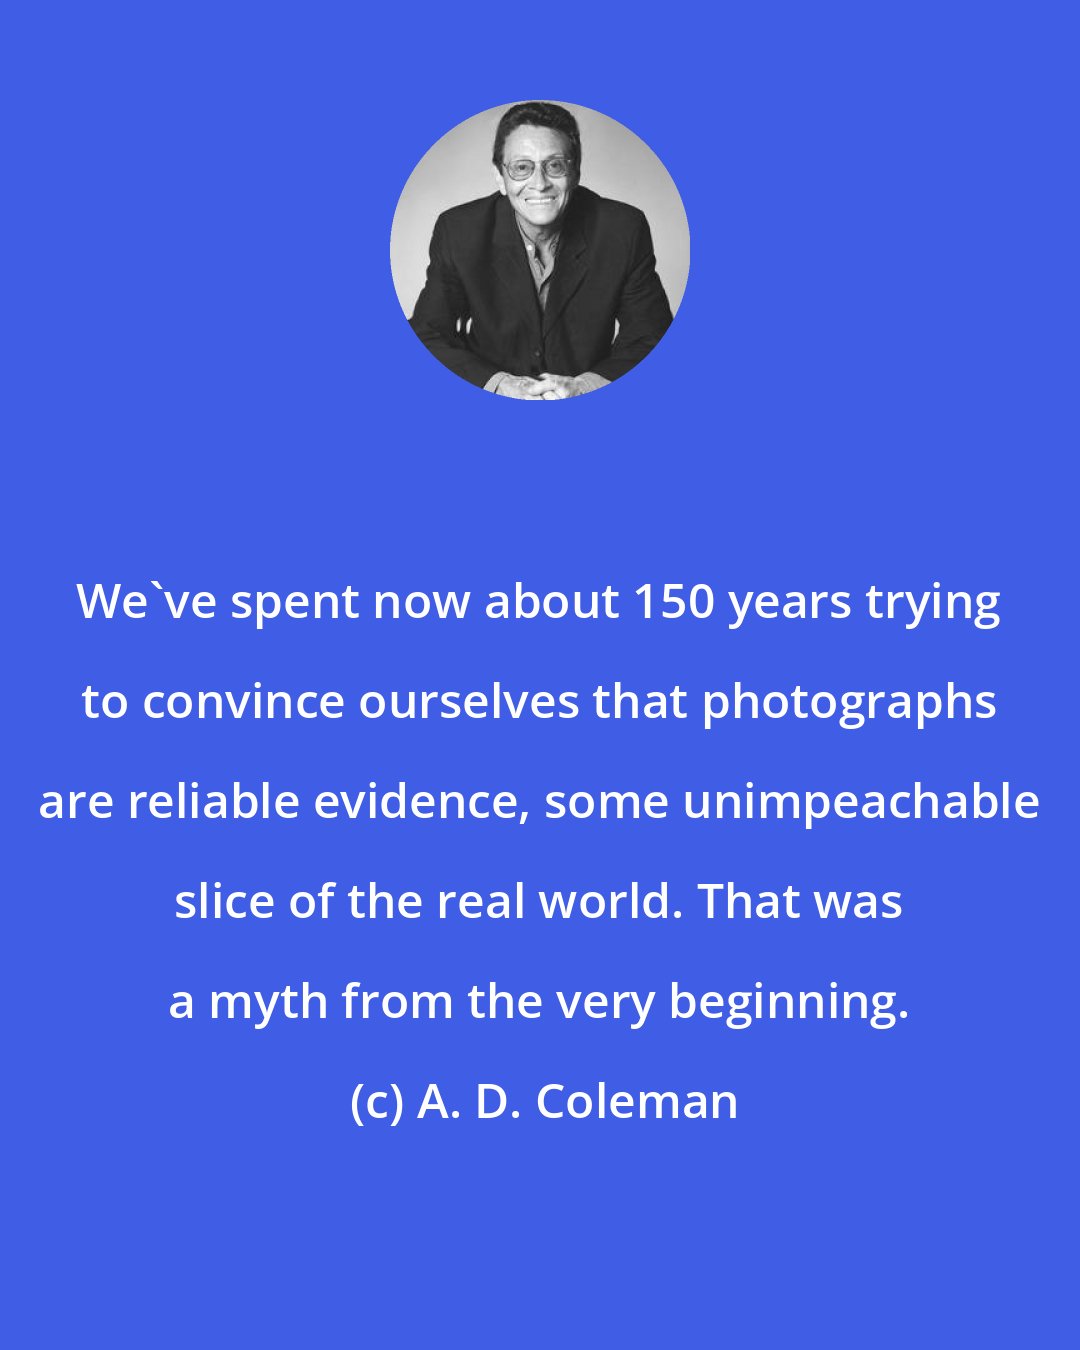 A. D. Coleman: We've spent now about 150 years trying to convince ourselves that photographs are reliable evidence, some unimpeachable slice of the real world. That was a myth from the very beginning.